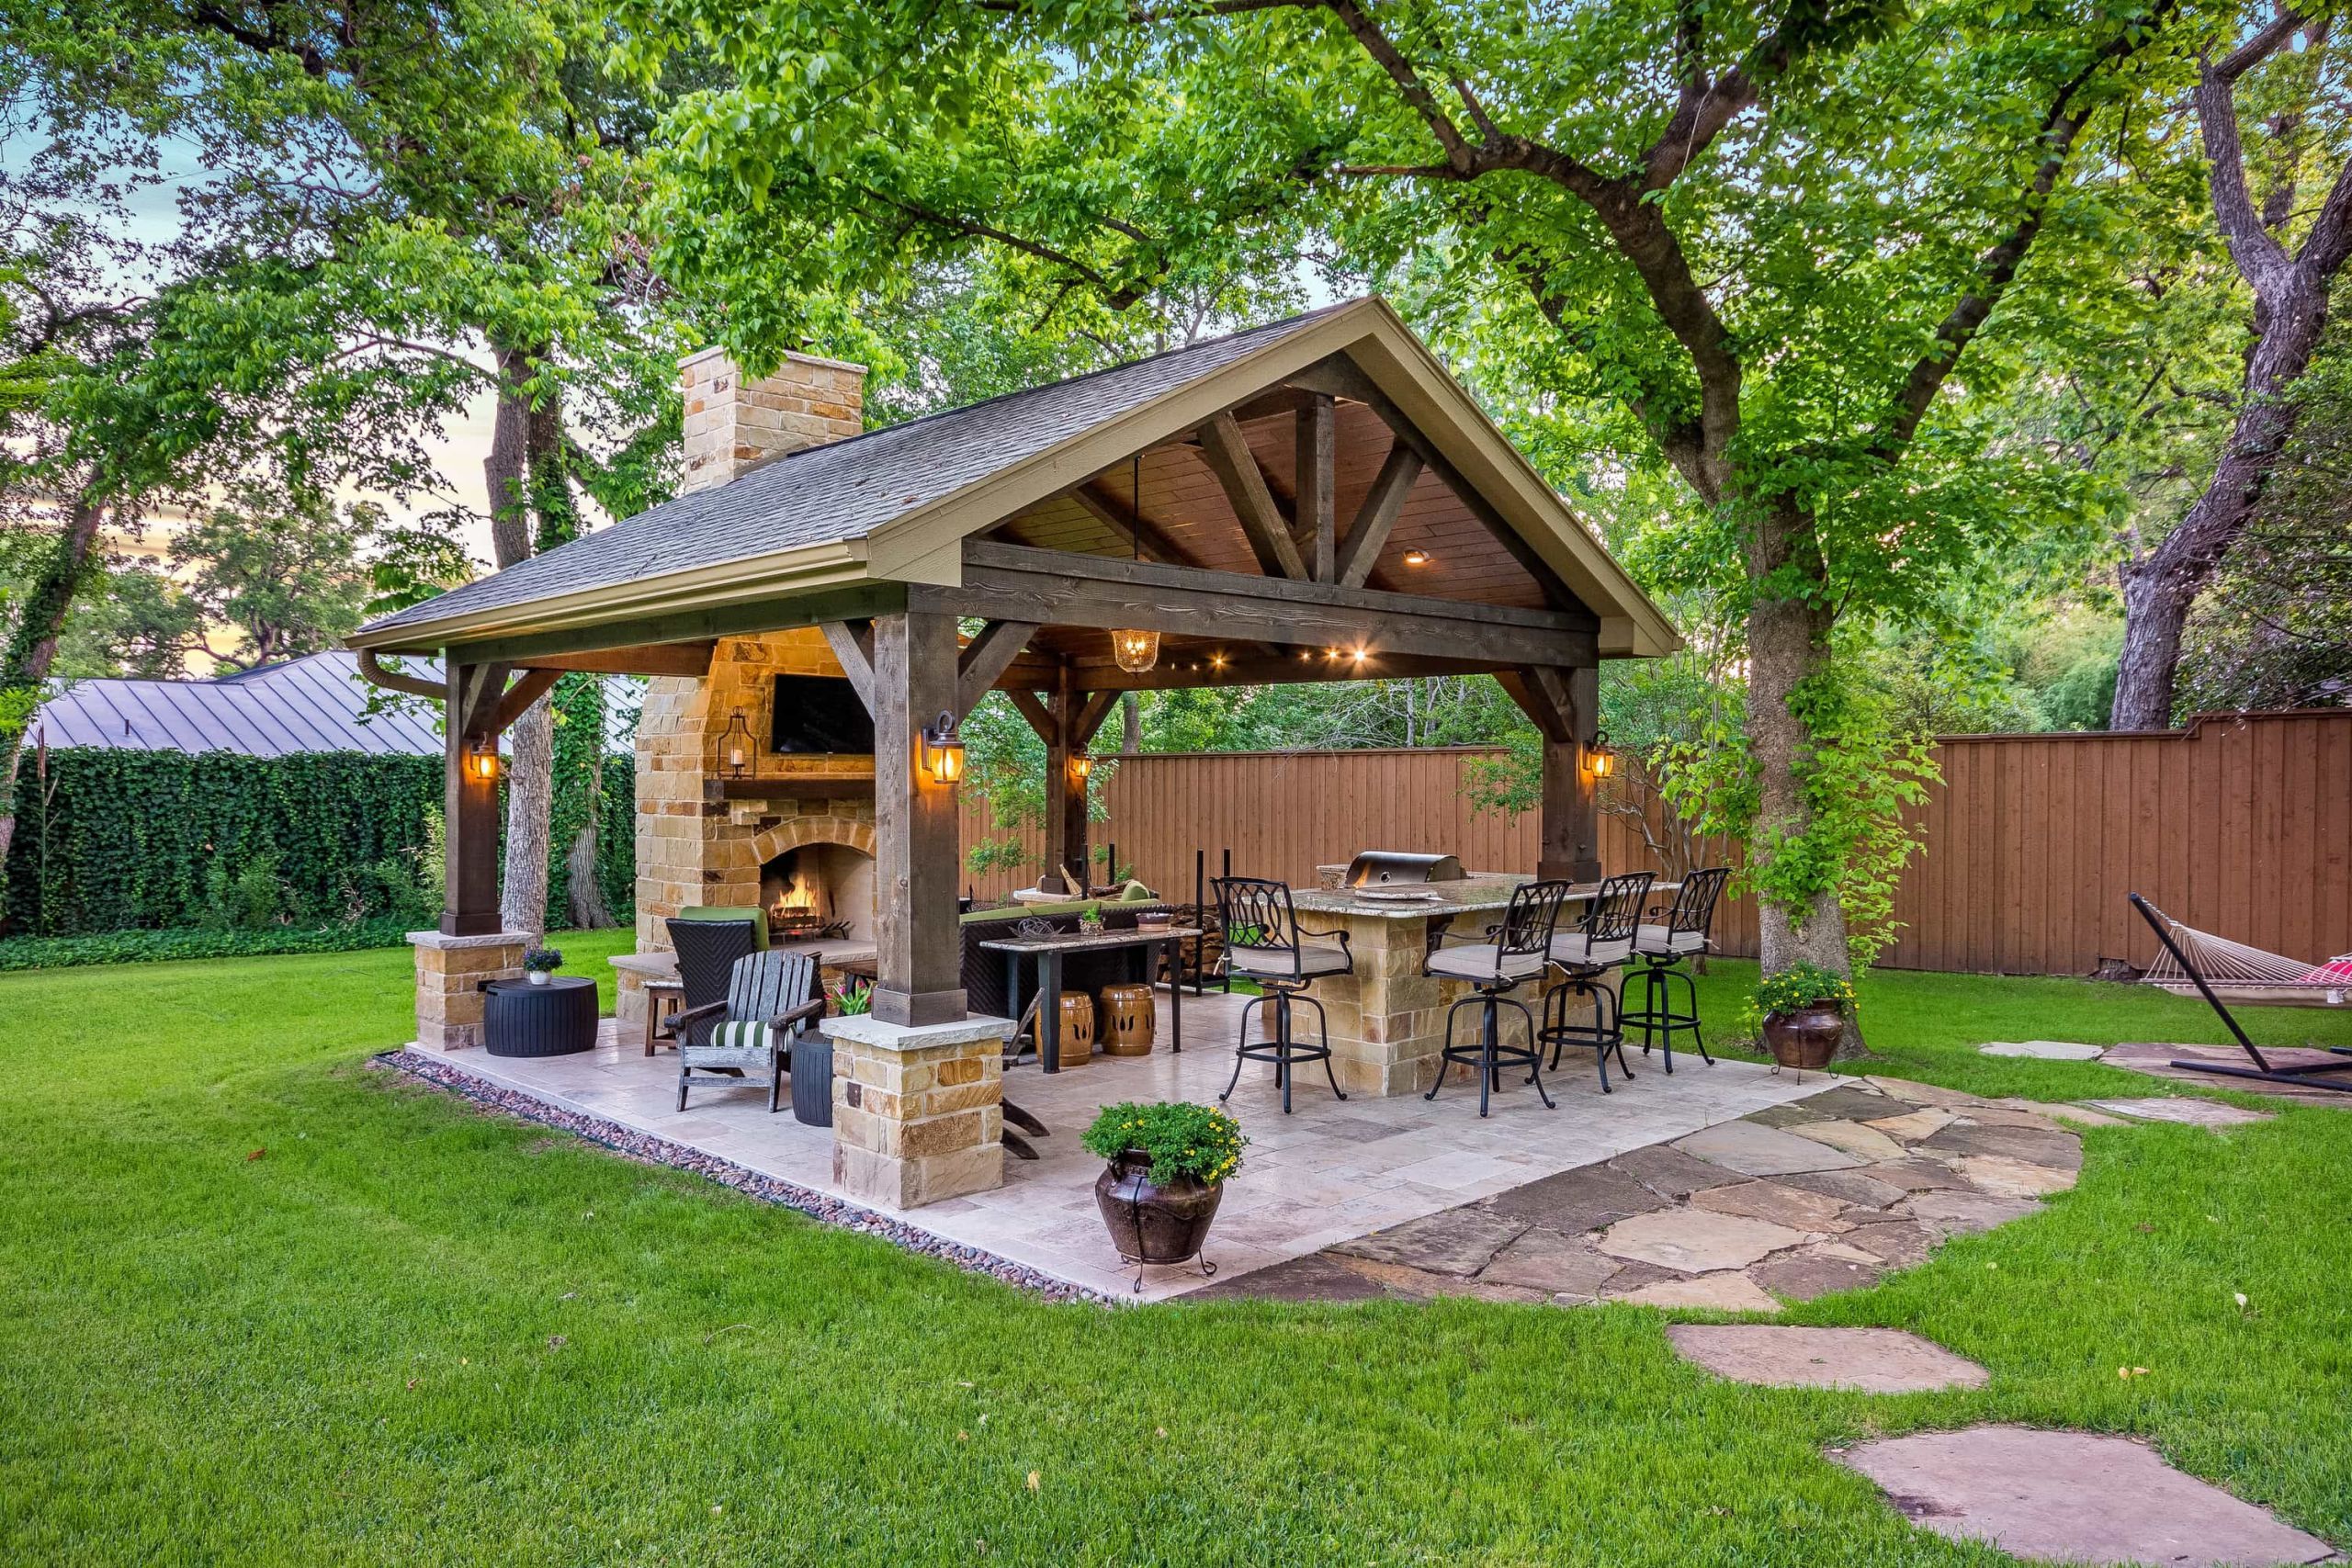 Covered Outdoor Kitchen Structures
 Detached Fireplace Covered Outdoor Patio This Standing